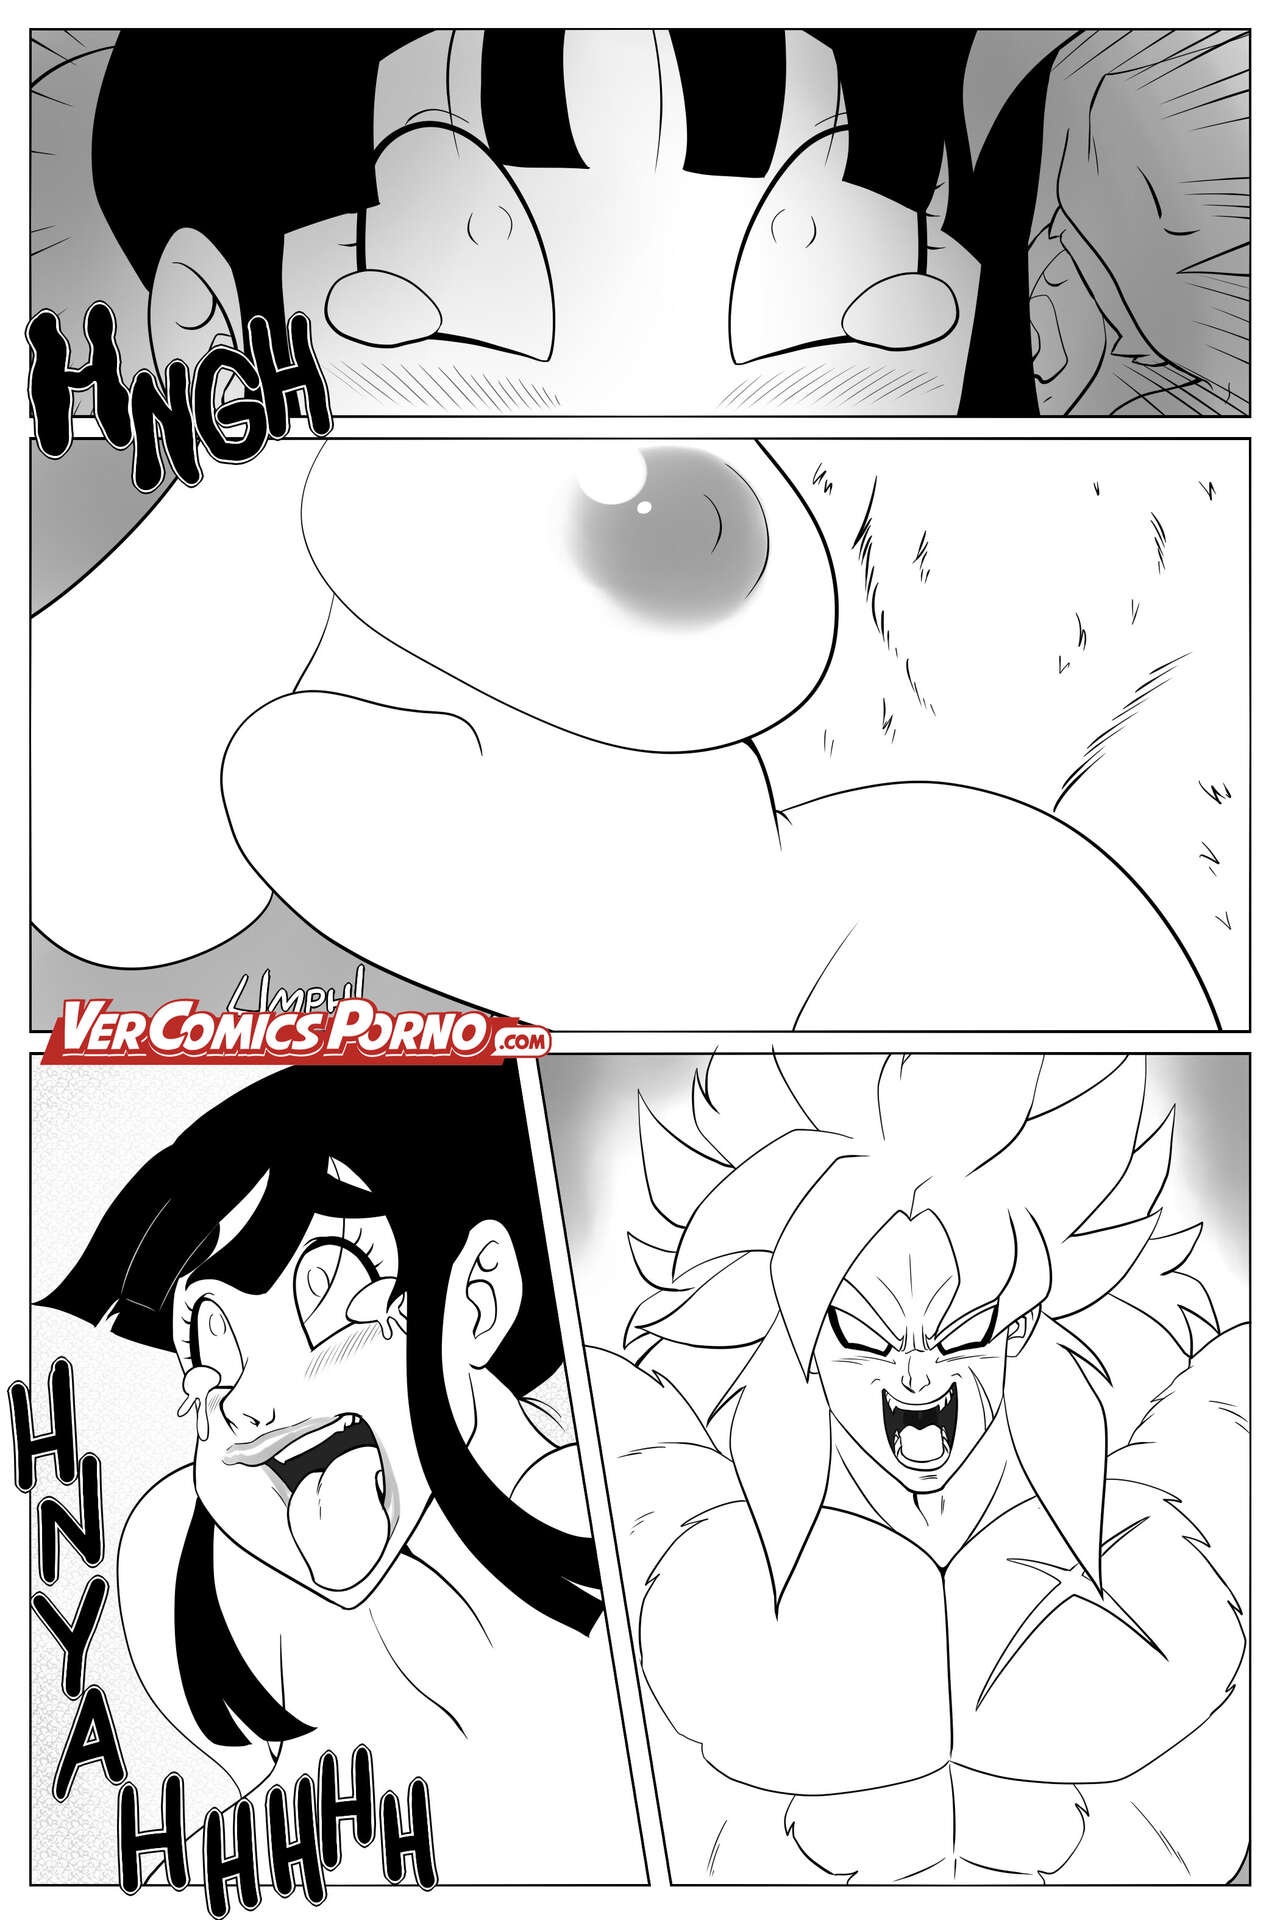 [Pranky] Almighty Broly Ch. 1-2 (Dragon Ball Super) (Spanish) [VCP] 20